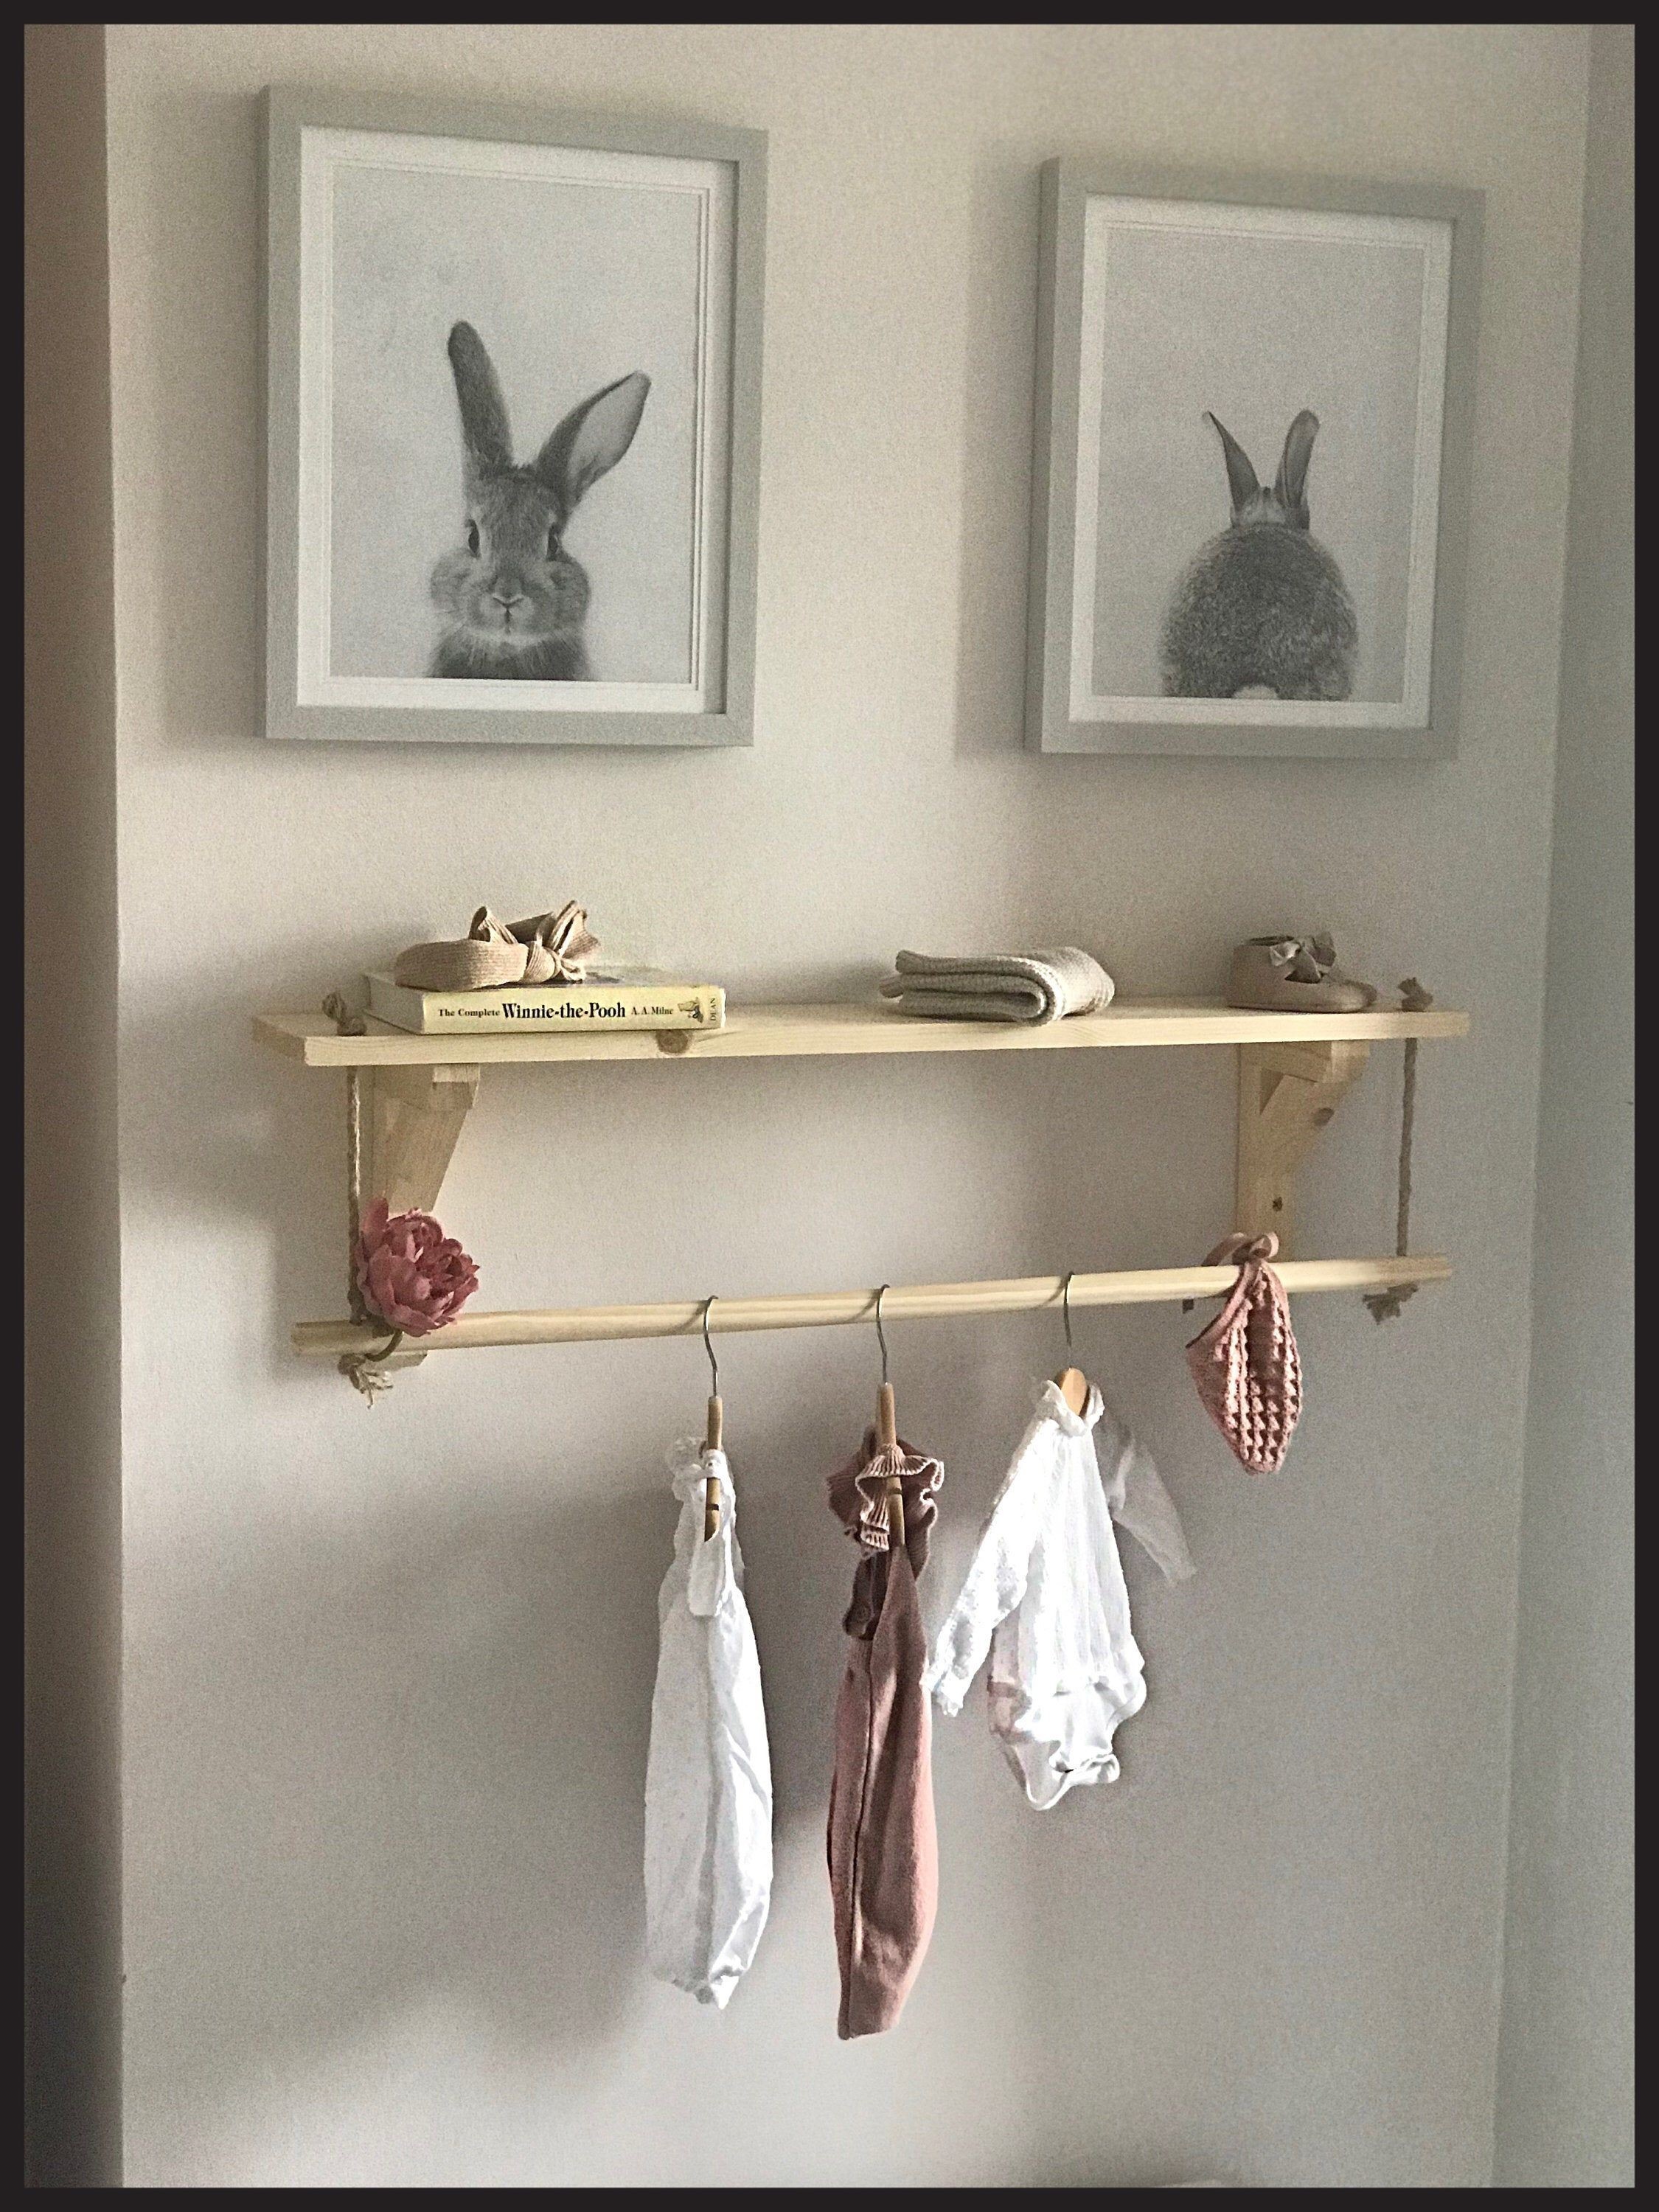 Shelf with hanging rod wooden nursery shelving timber